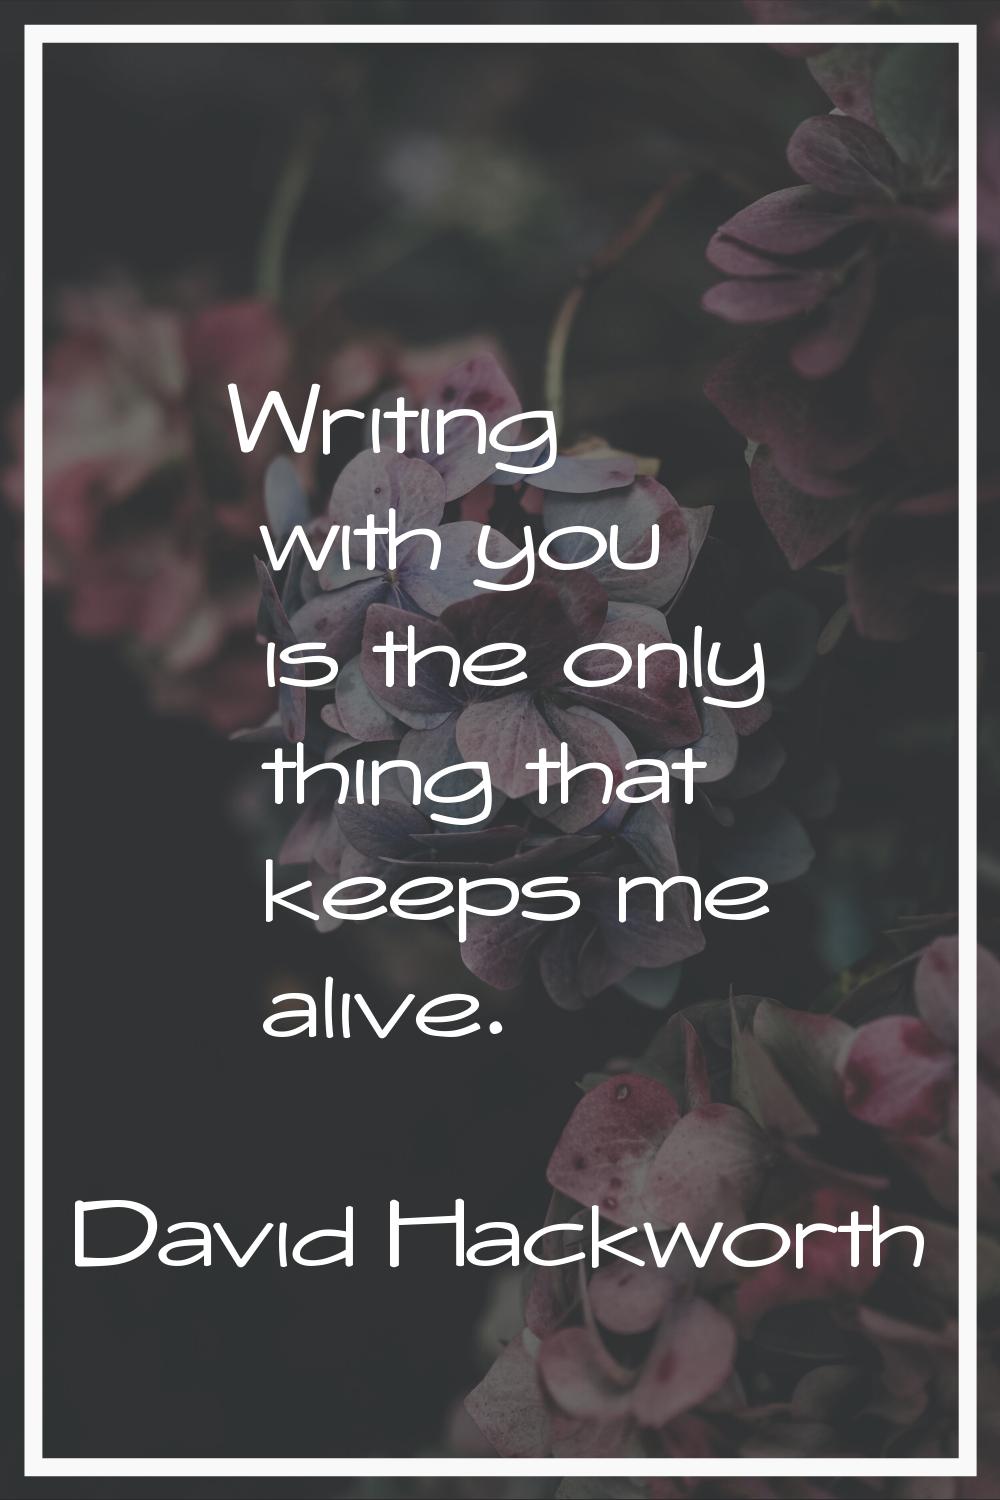 Writing with you is the only thing that keeps me alive.